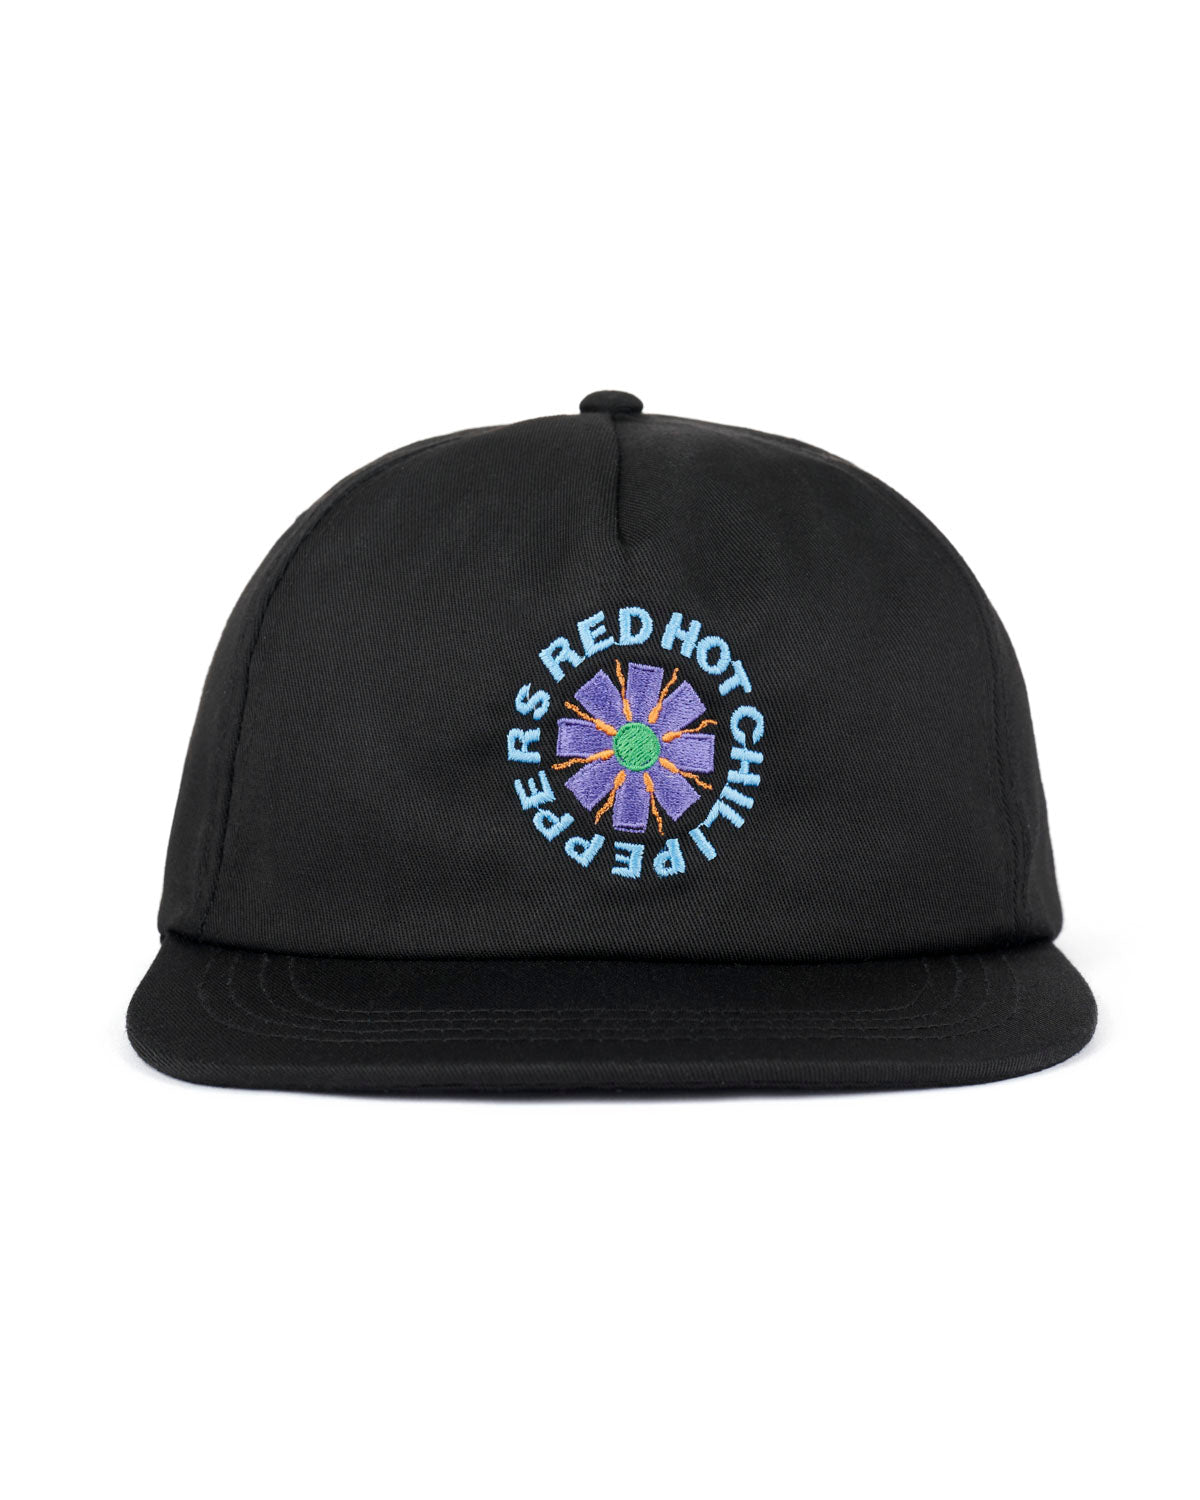 Brain Dead x Red Hot Chili Peppers Hat - Black 1